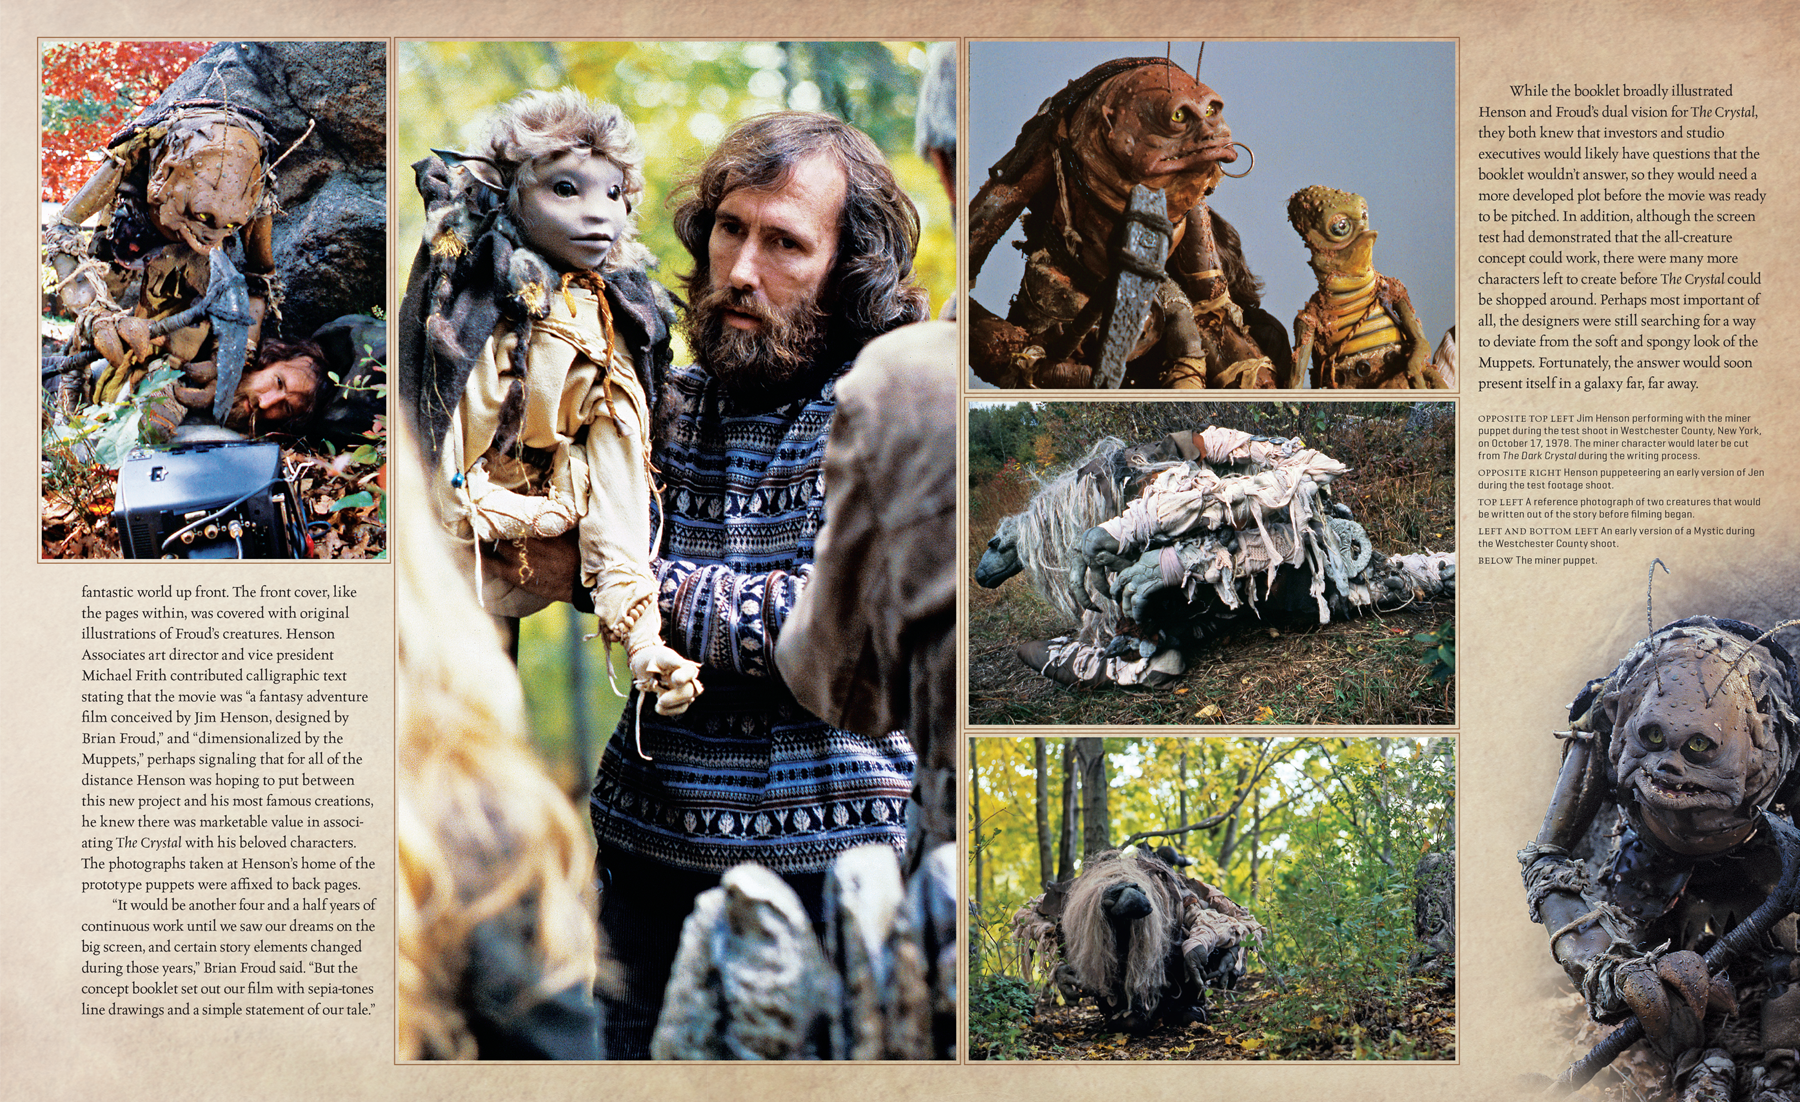 A Look Inside The Definitive Book On Bringing The Dark Crystal to Life